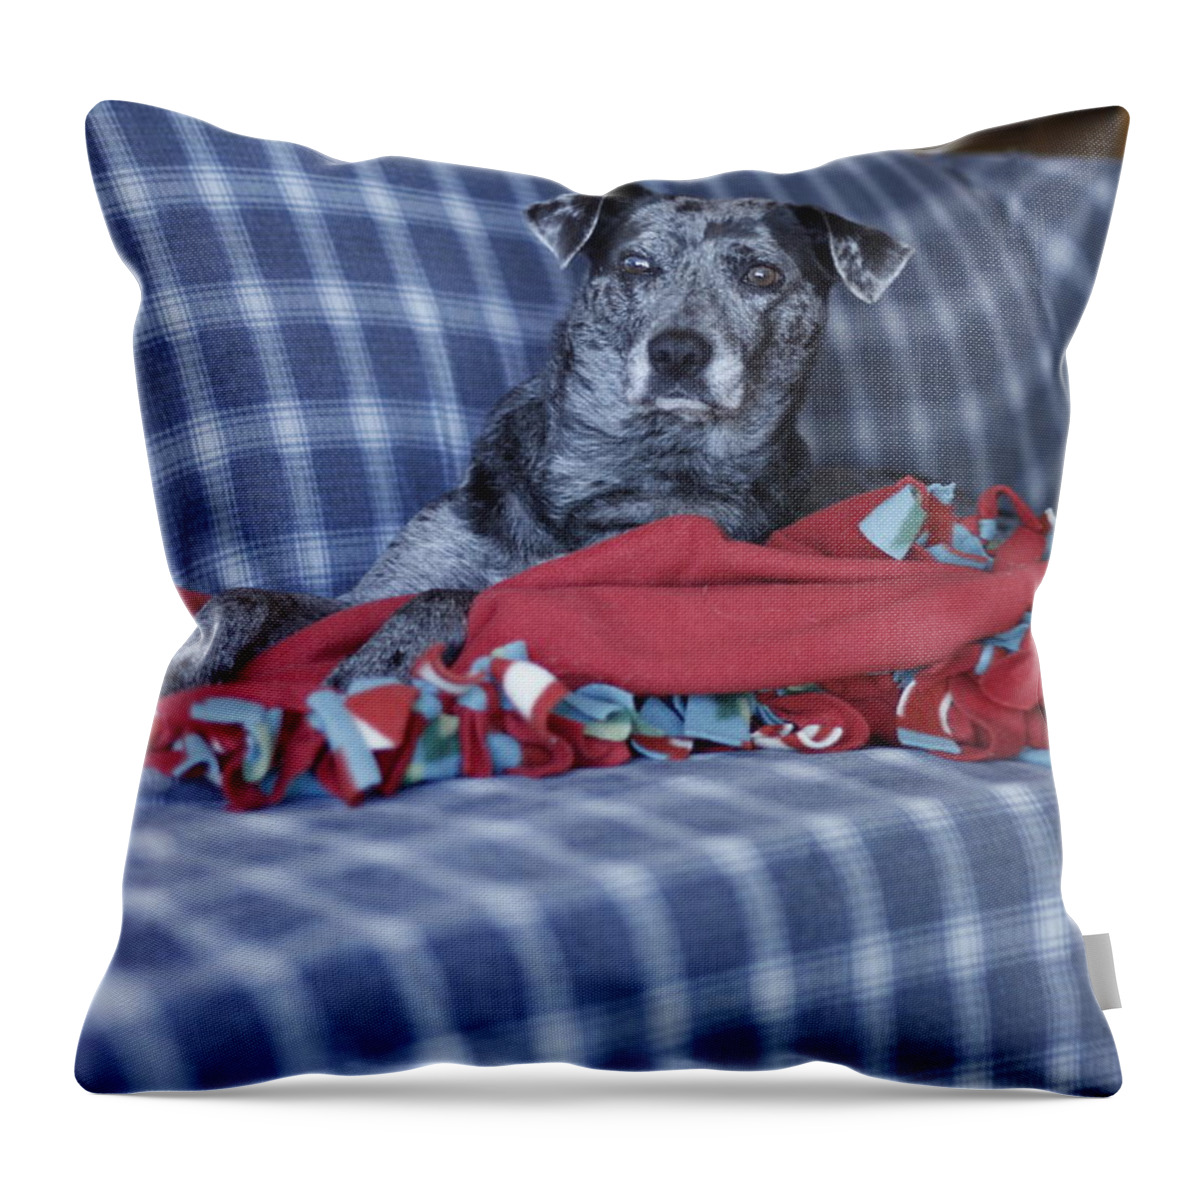 Catahoula Leopard Dog Throw Pillow featuring the photograph Catahoula Leopard Dog in blue by Valerie Collins